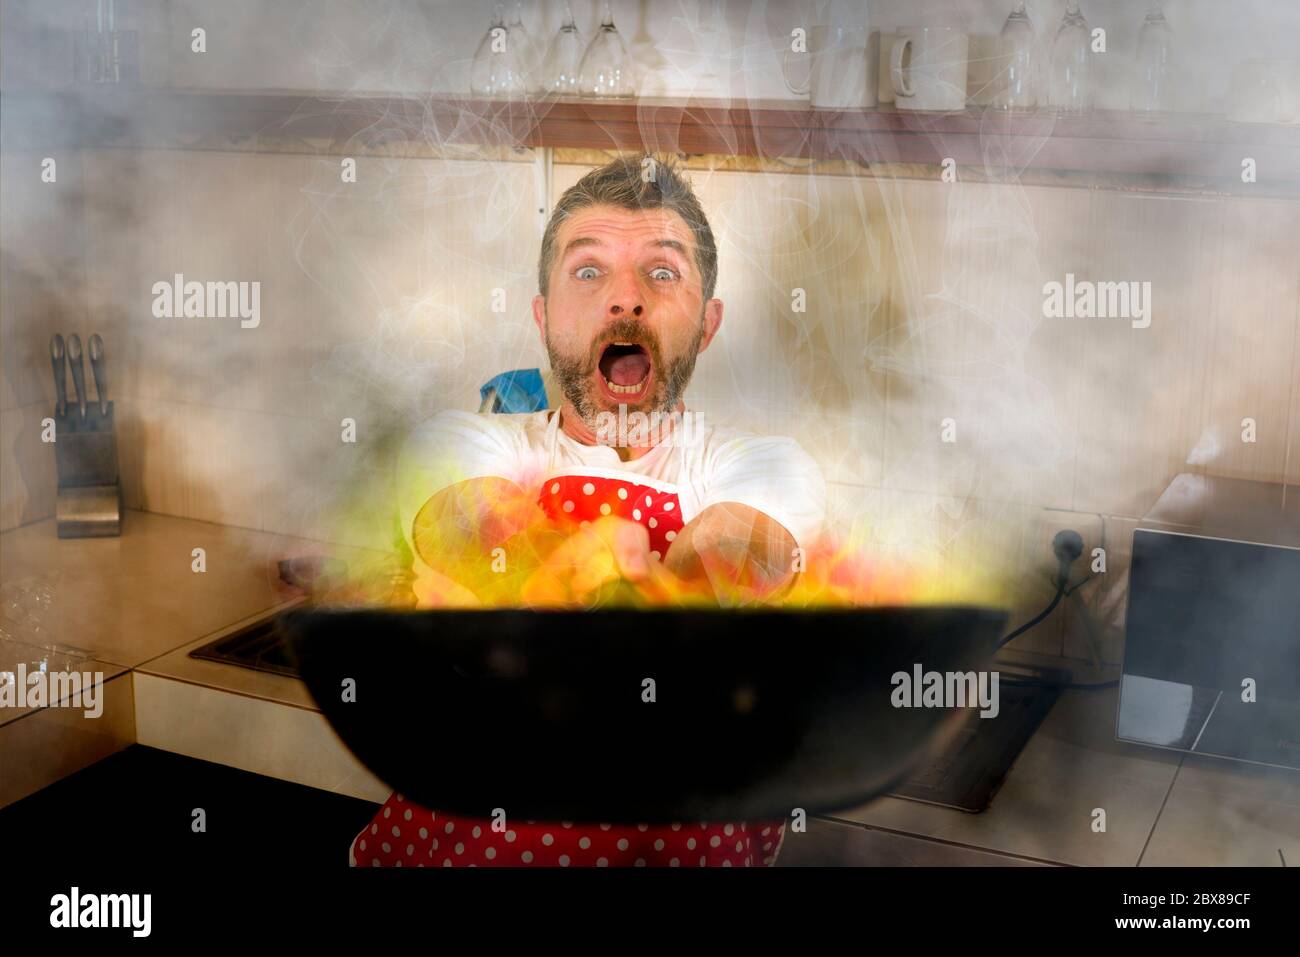 disaster home cook at kitchen- young funny and desperate man in cooking apron holding pan in flames in stress and fear making a mess of fire and smoke Stock Photo